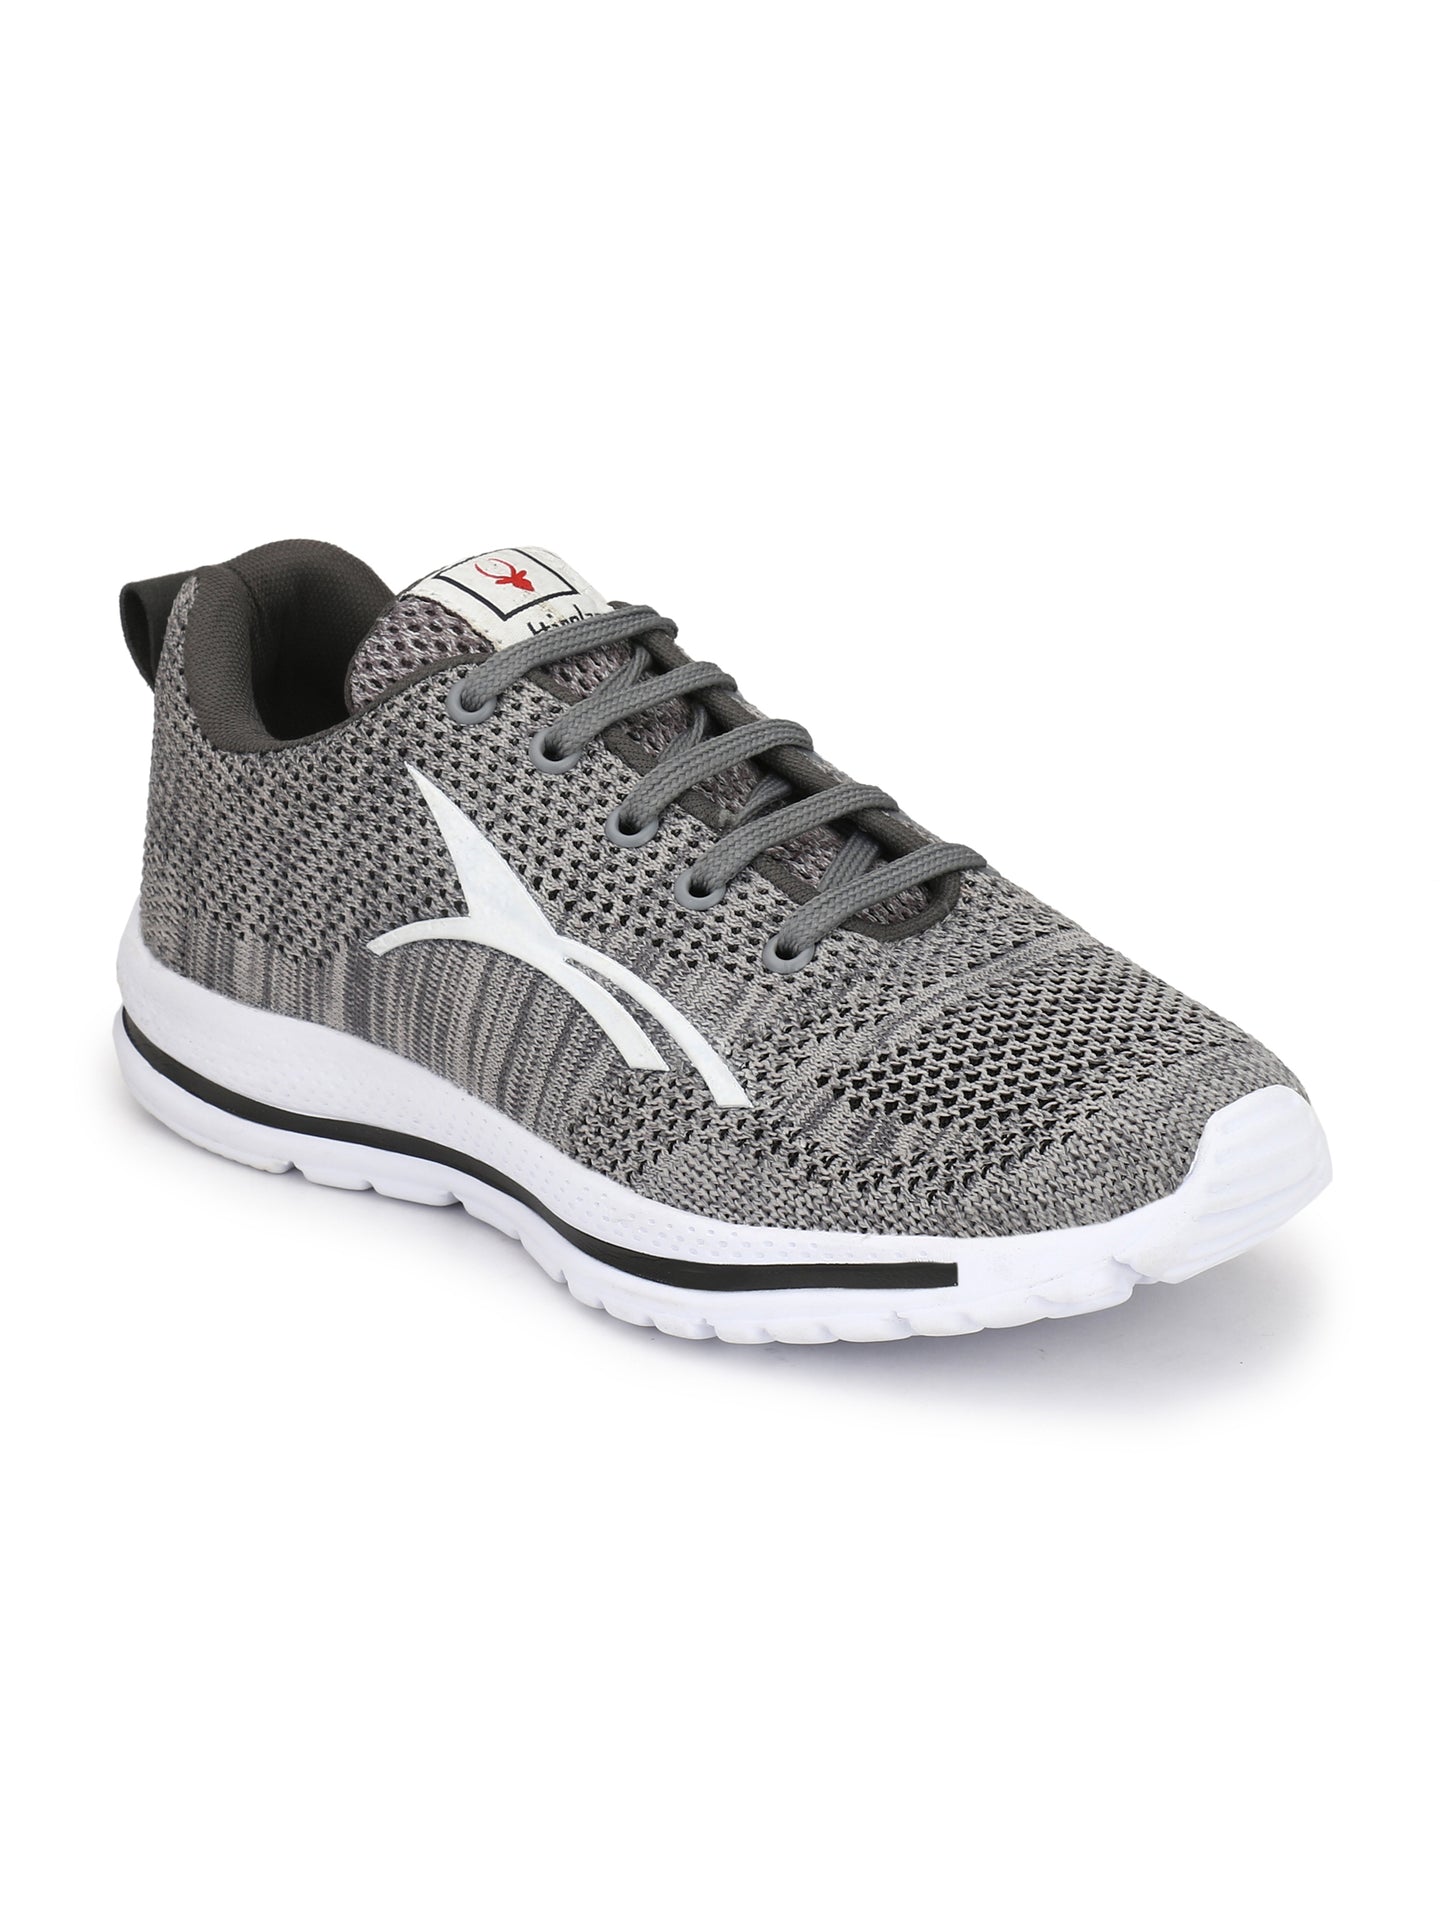 Hirolas® Men's Grey Flyknit Lace-Up Athleisure Sports Shoes